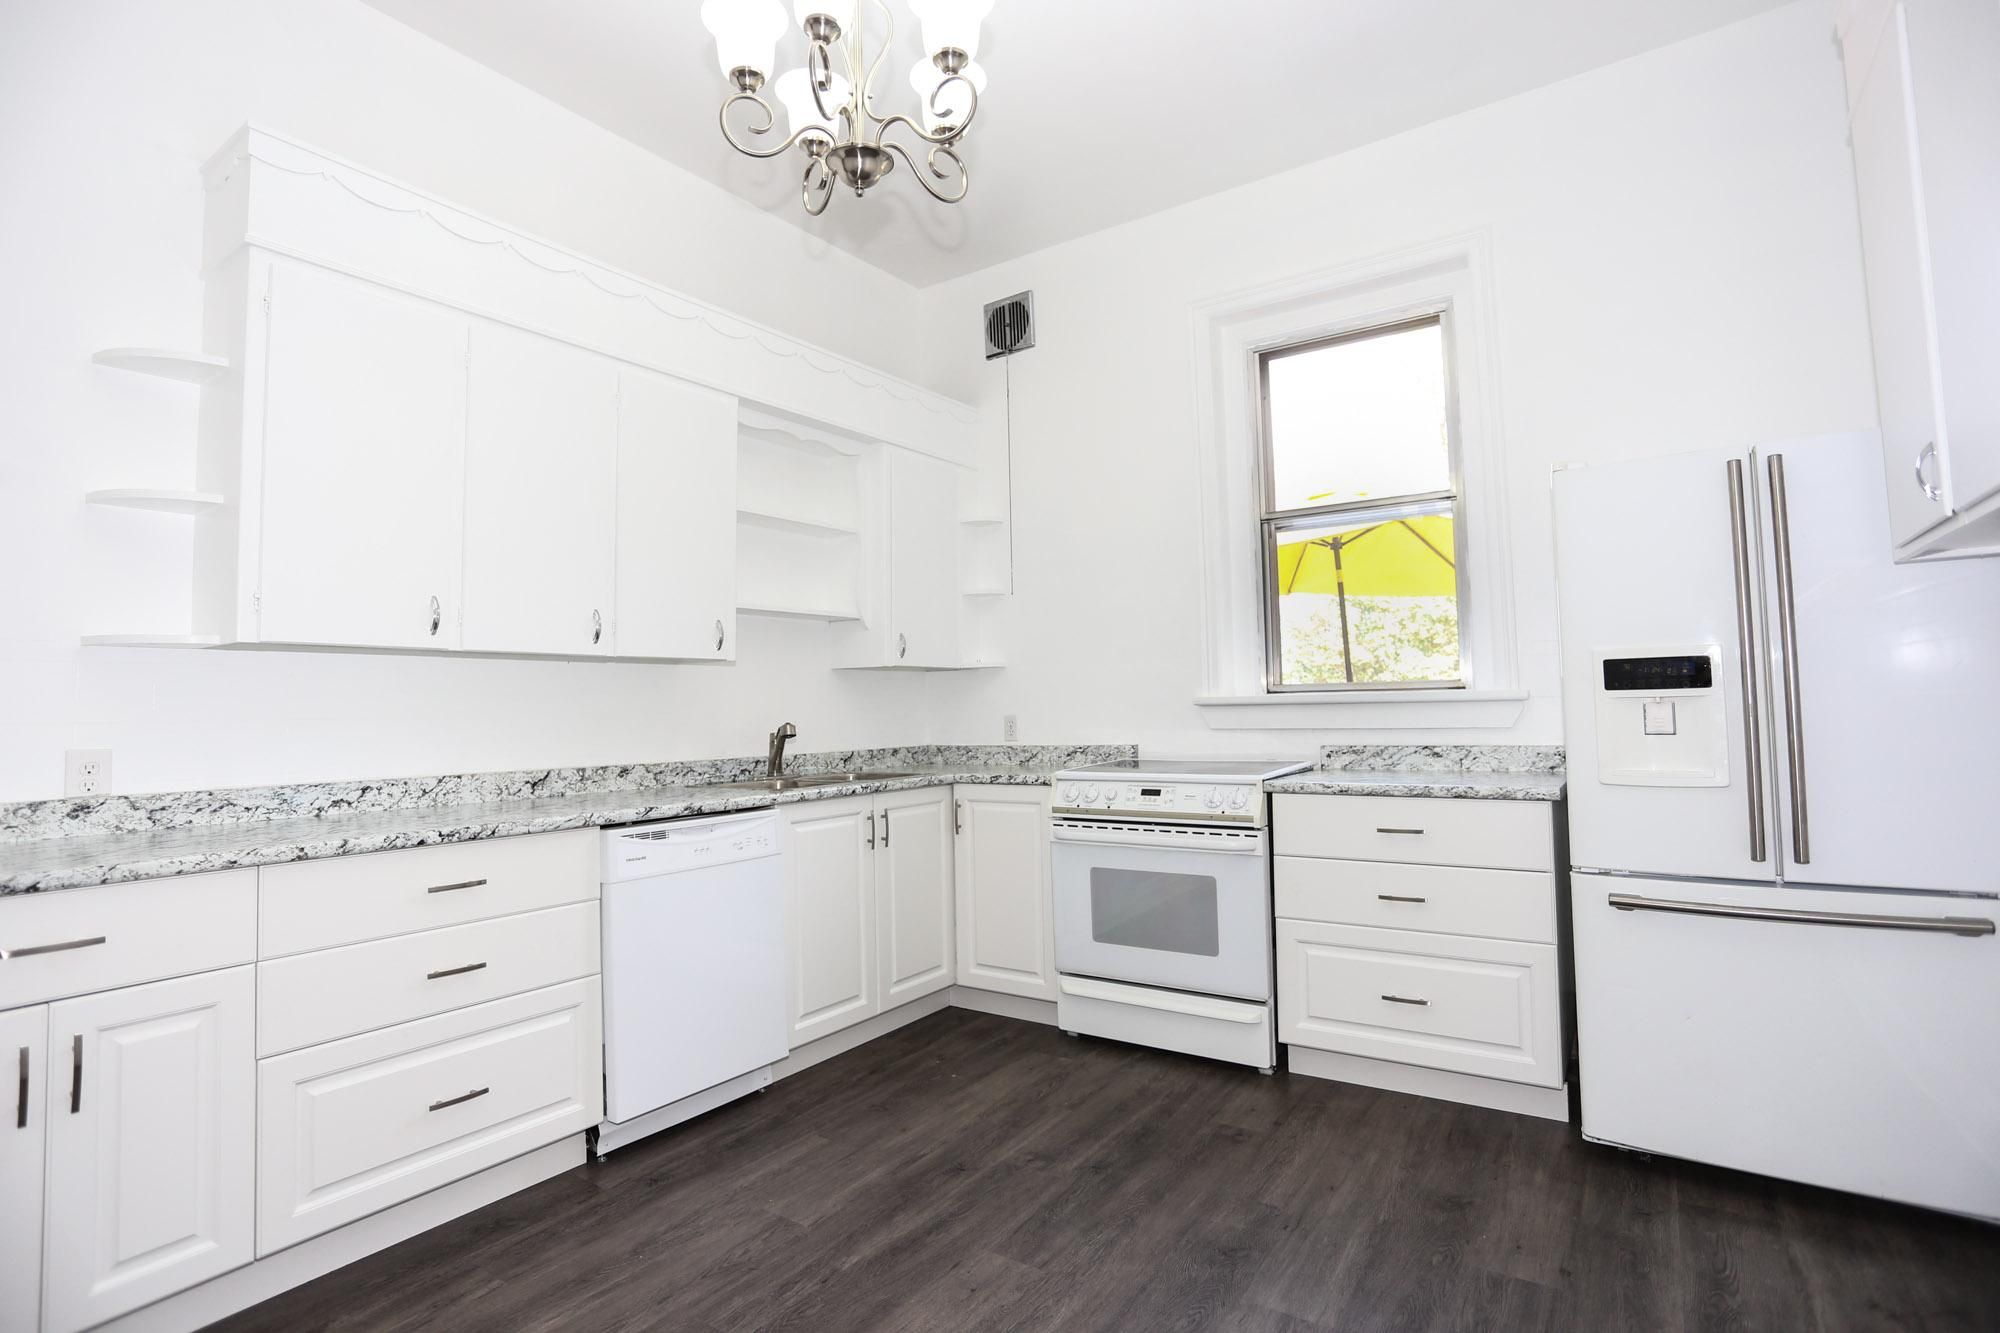 Photo 11: Photos: 145 Middle Gate in Winnipeg: Armstrong's Point Duplex for sale (1C)  : MLS®# 1823635